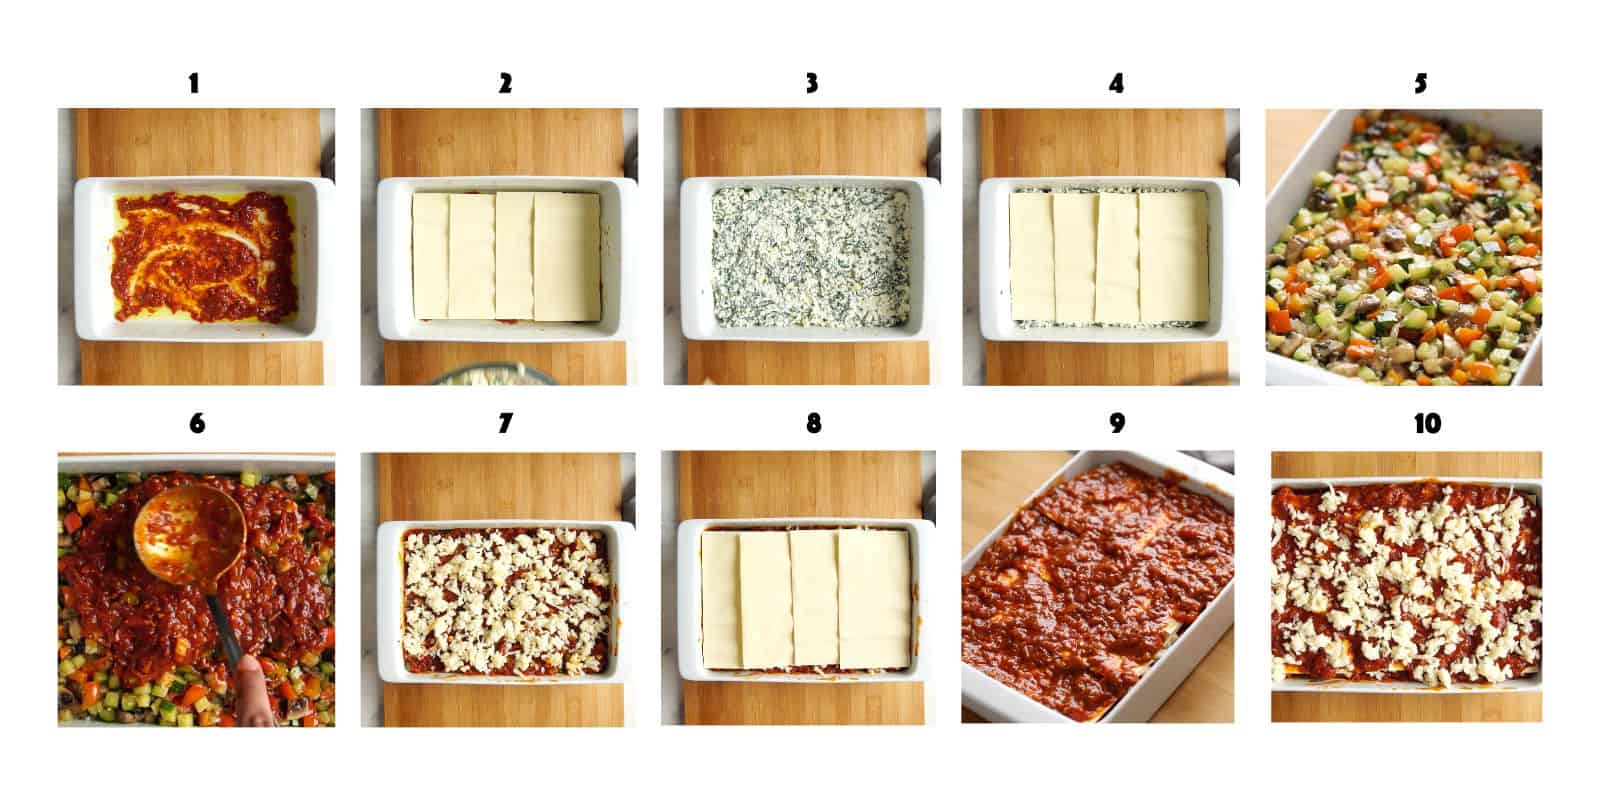 How to layer a lasagna